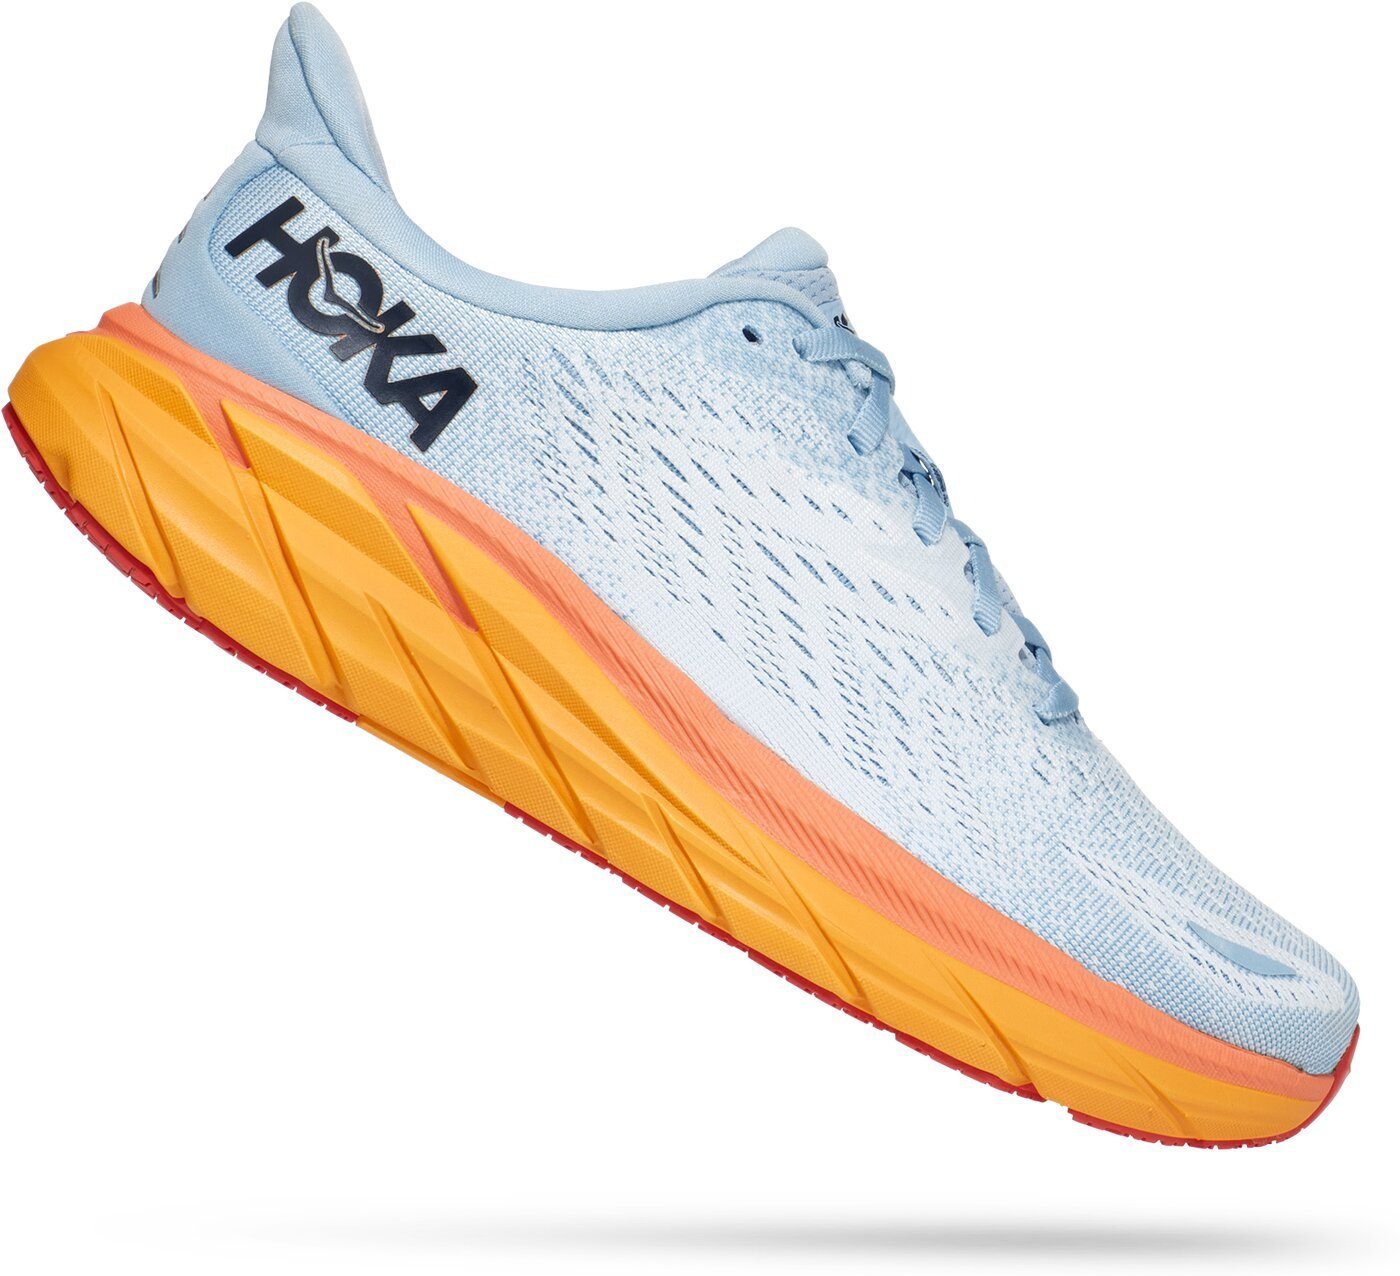 Laufschuh One FLOW CLIFTON SONG / ICE W SUMMER One Hoka 8